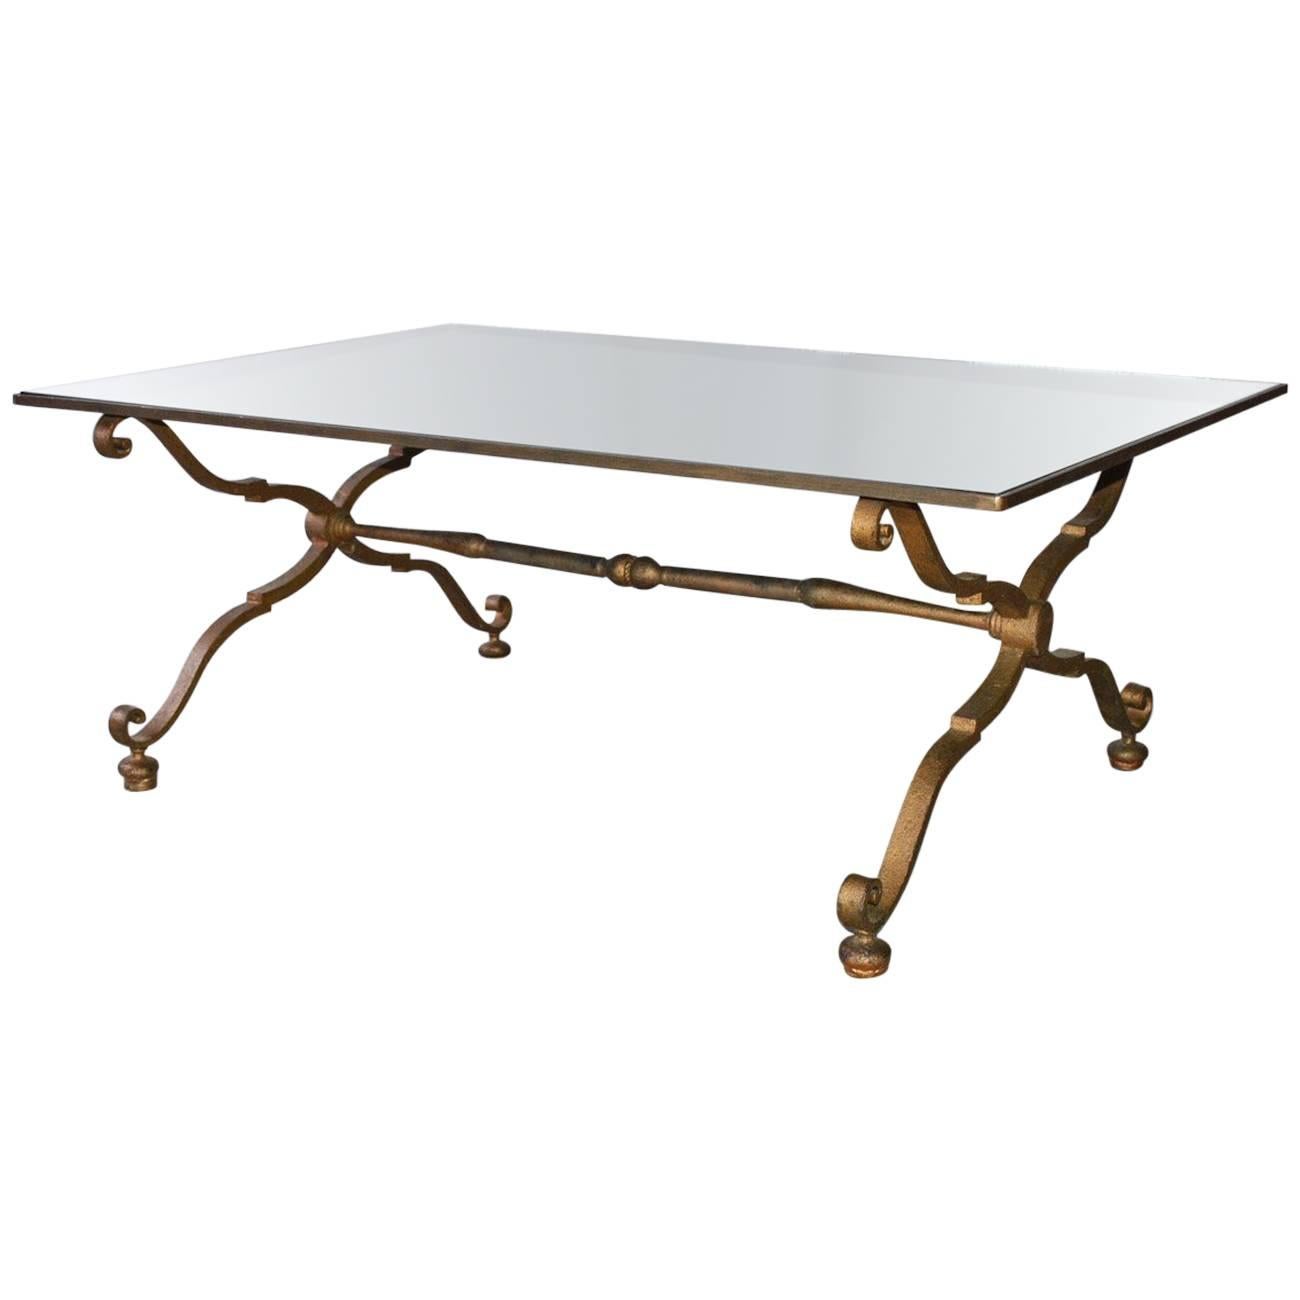 Vintage Gilt Wrought Iron and Mirrored Coffee Table